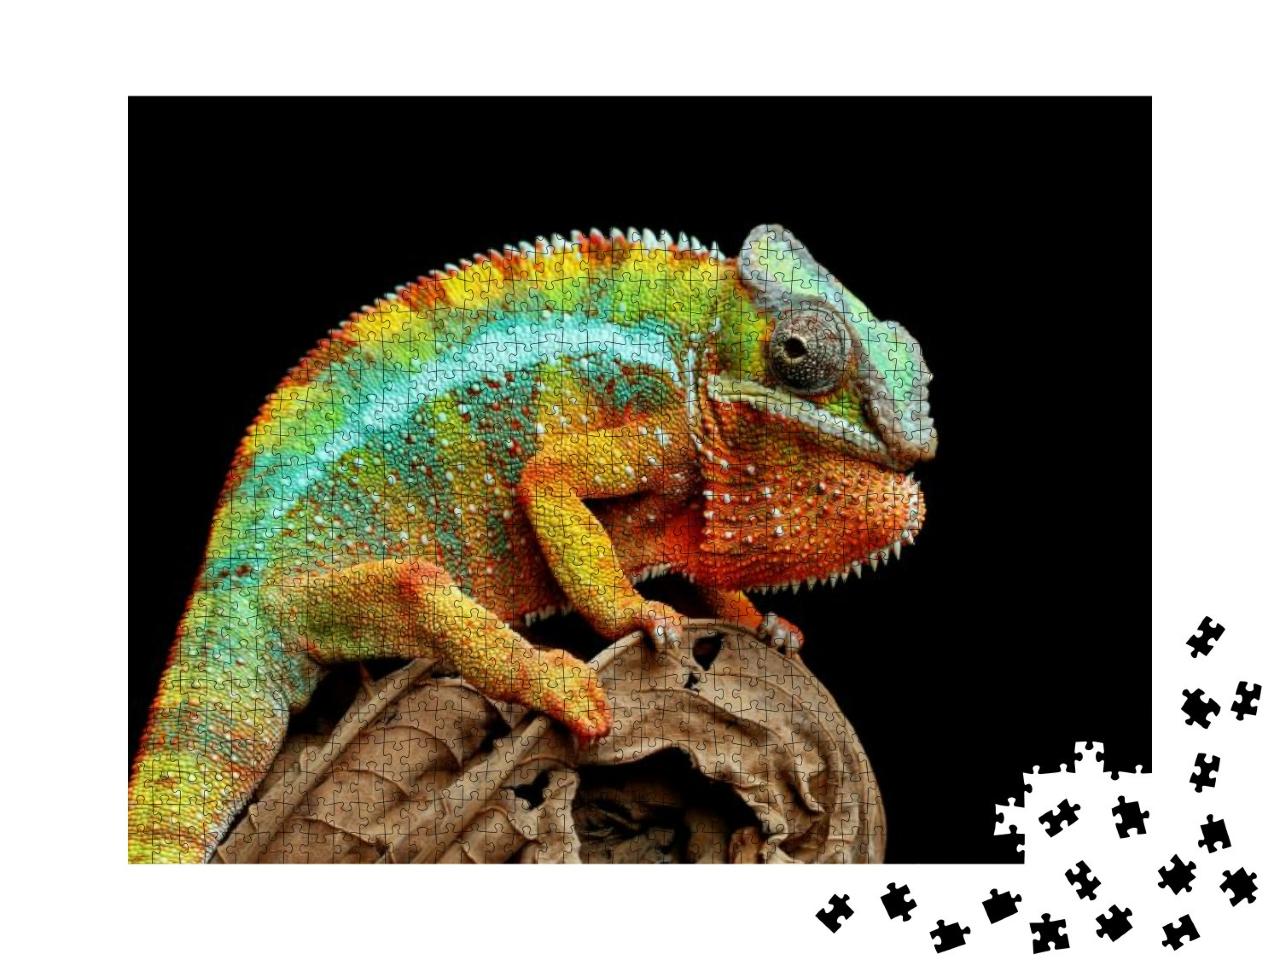 Beautiful of Chameleon Panther, Chameleon Panther on Bran... Jigsaw Puzzle with 1000 pieces